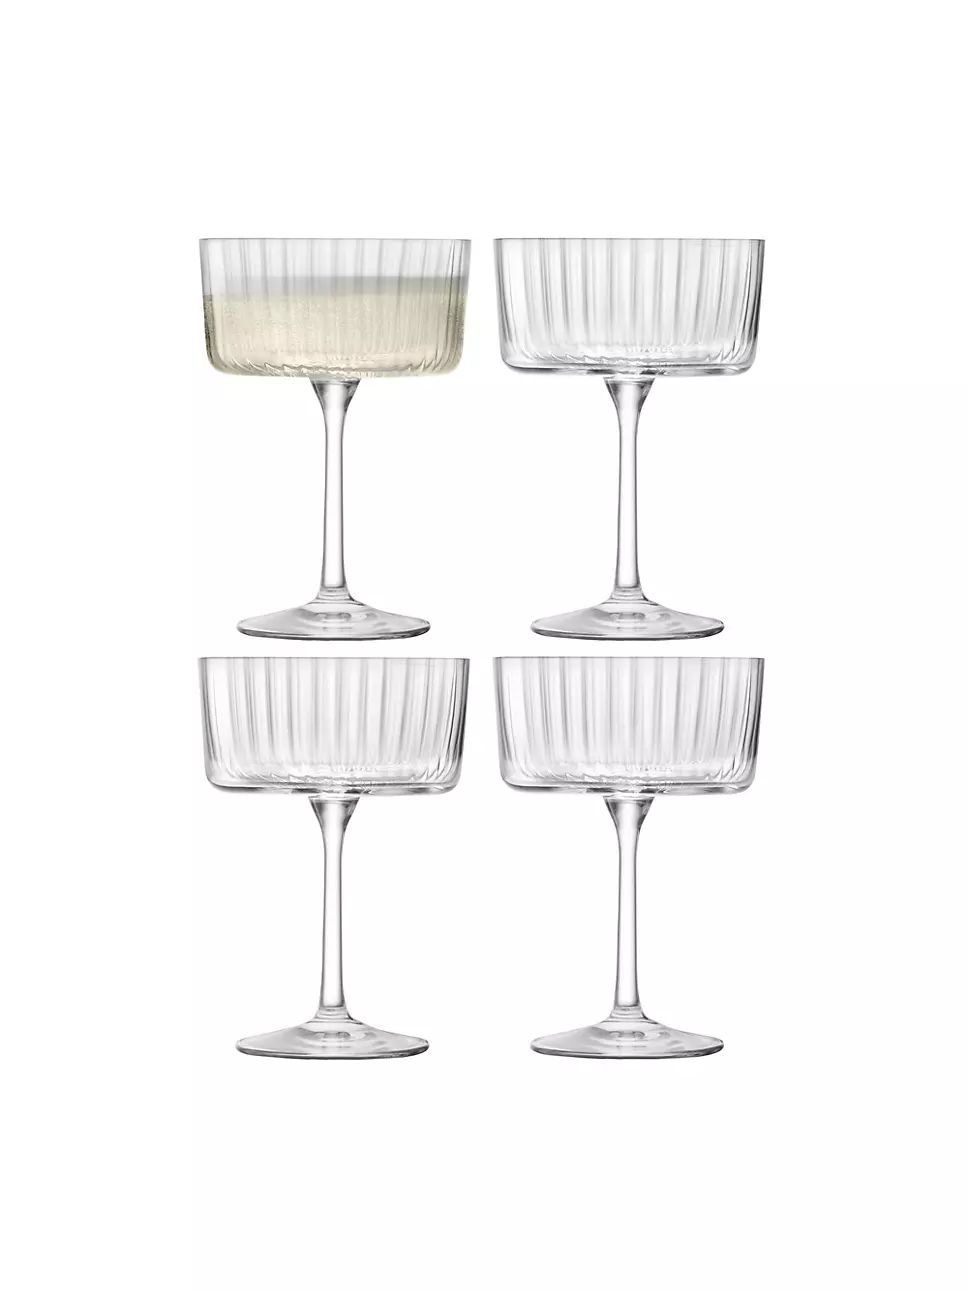 Gio Line 4-Piece Champagne/Cocktail Glasses Set | Saks Fifth Avenue